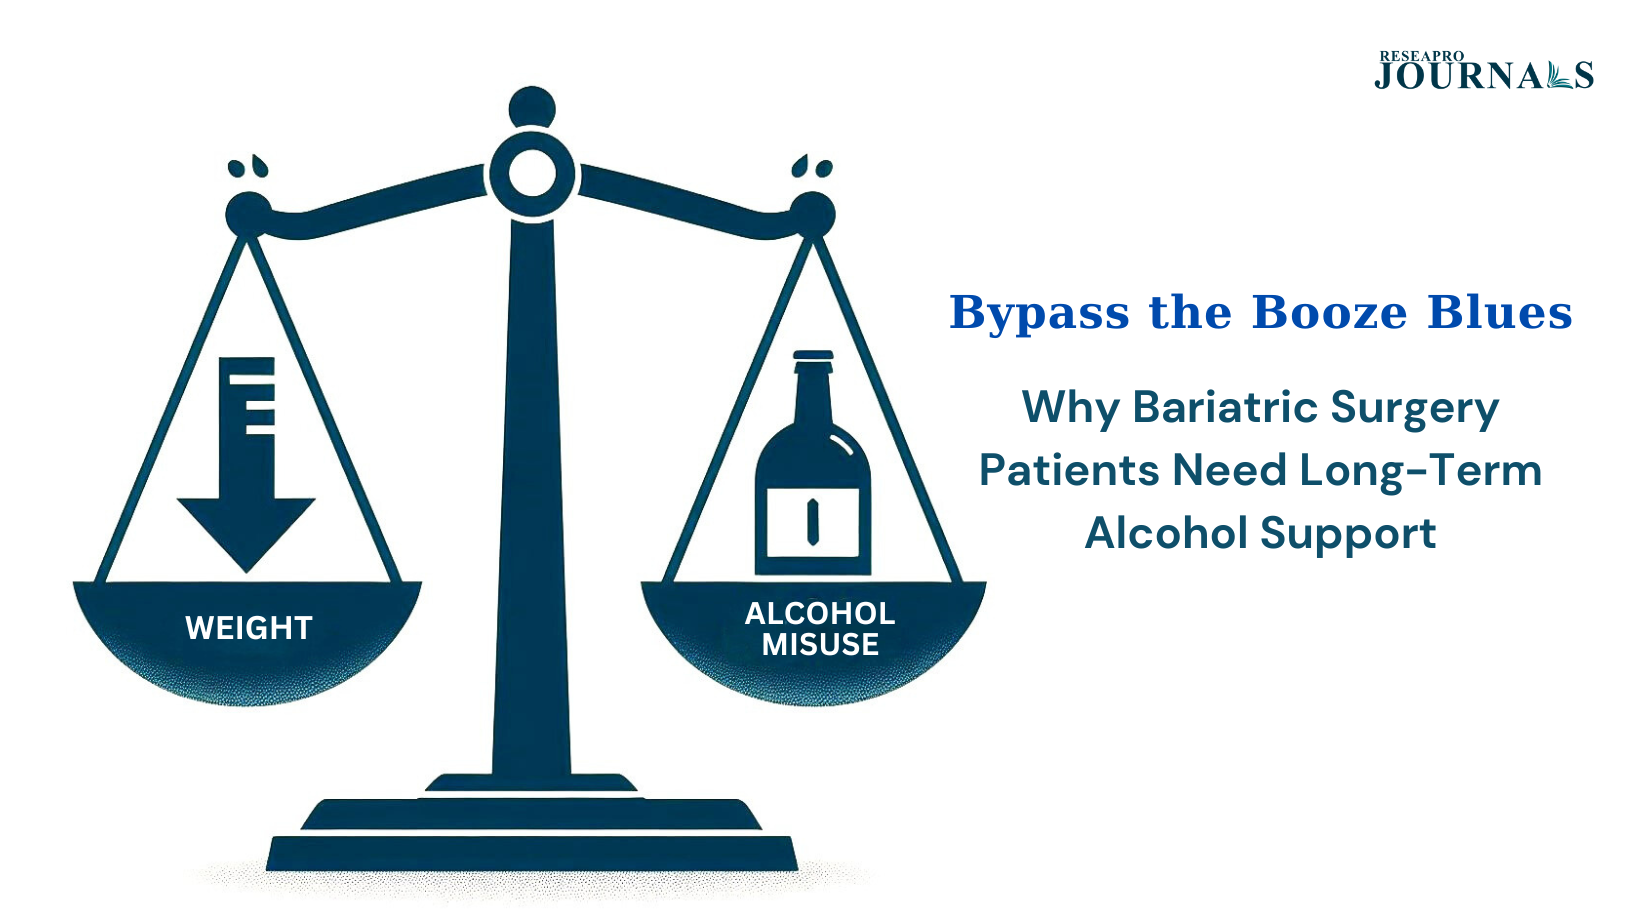 Bypass the Booze Blues: Why Bariatric Surgery Patients Need Long-Term Alcohol Support